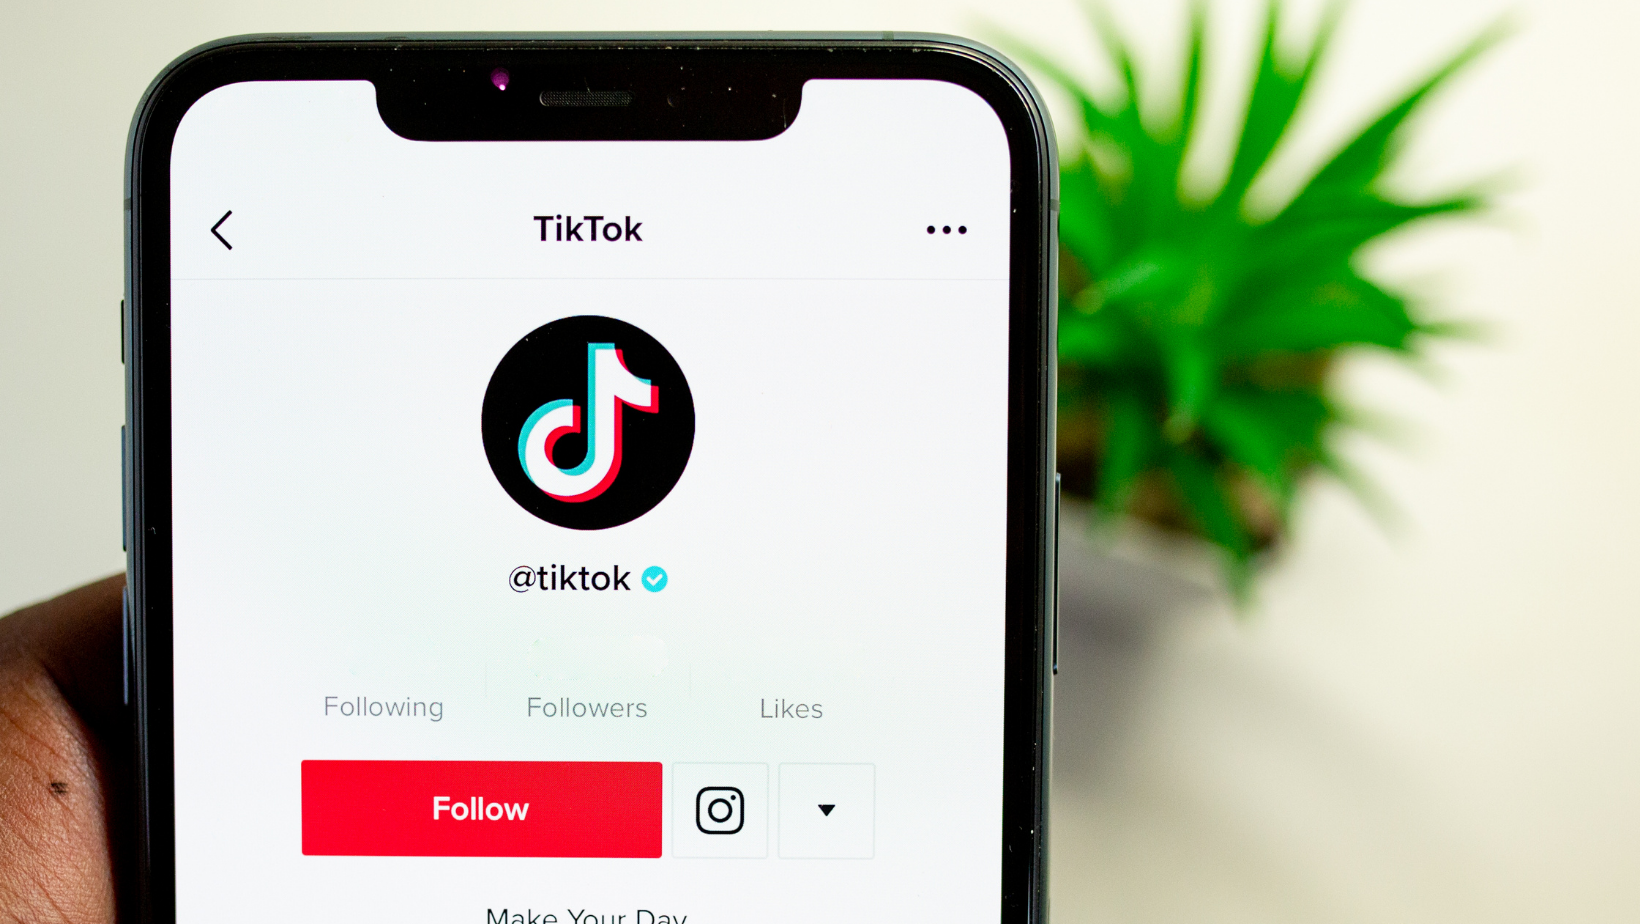 Chamber how to: is tiktok for businesses? Article Photo